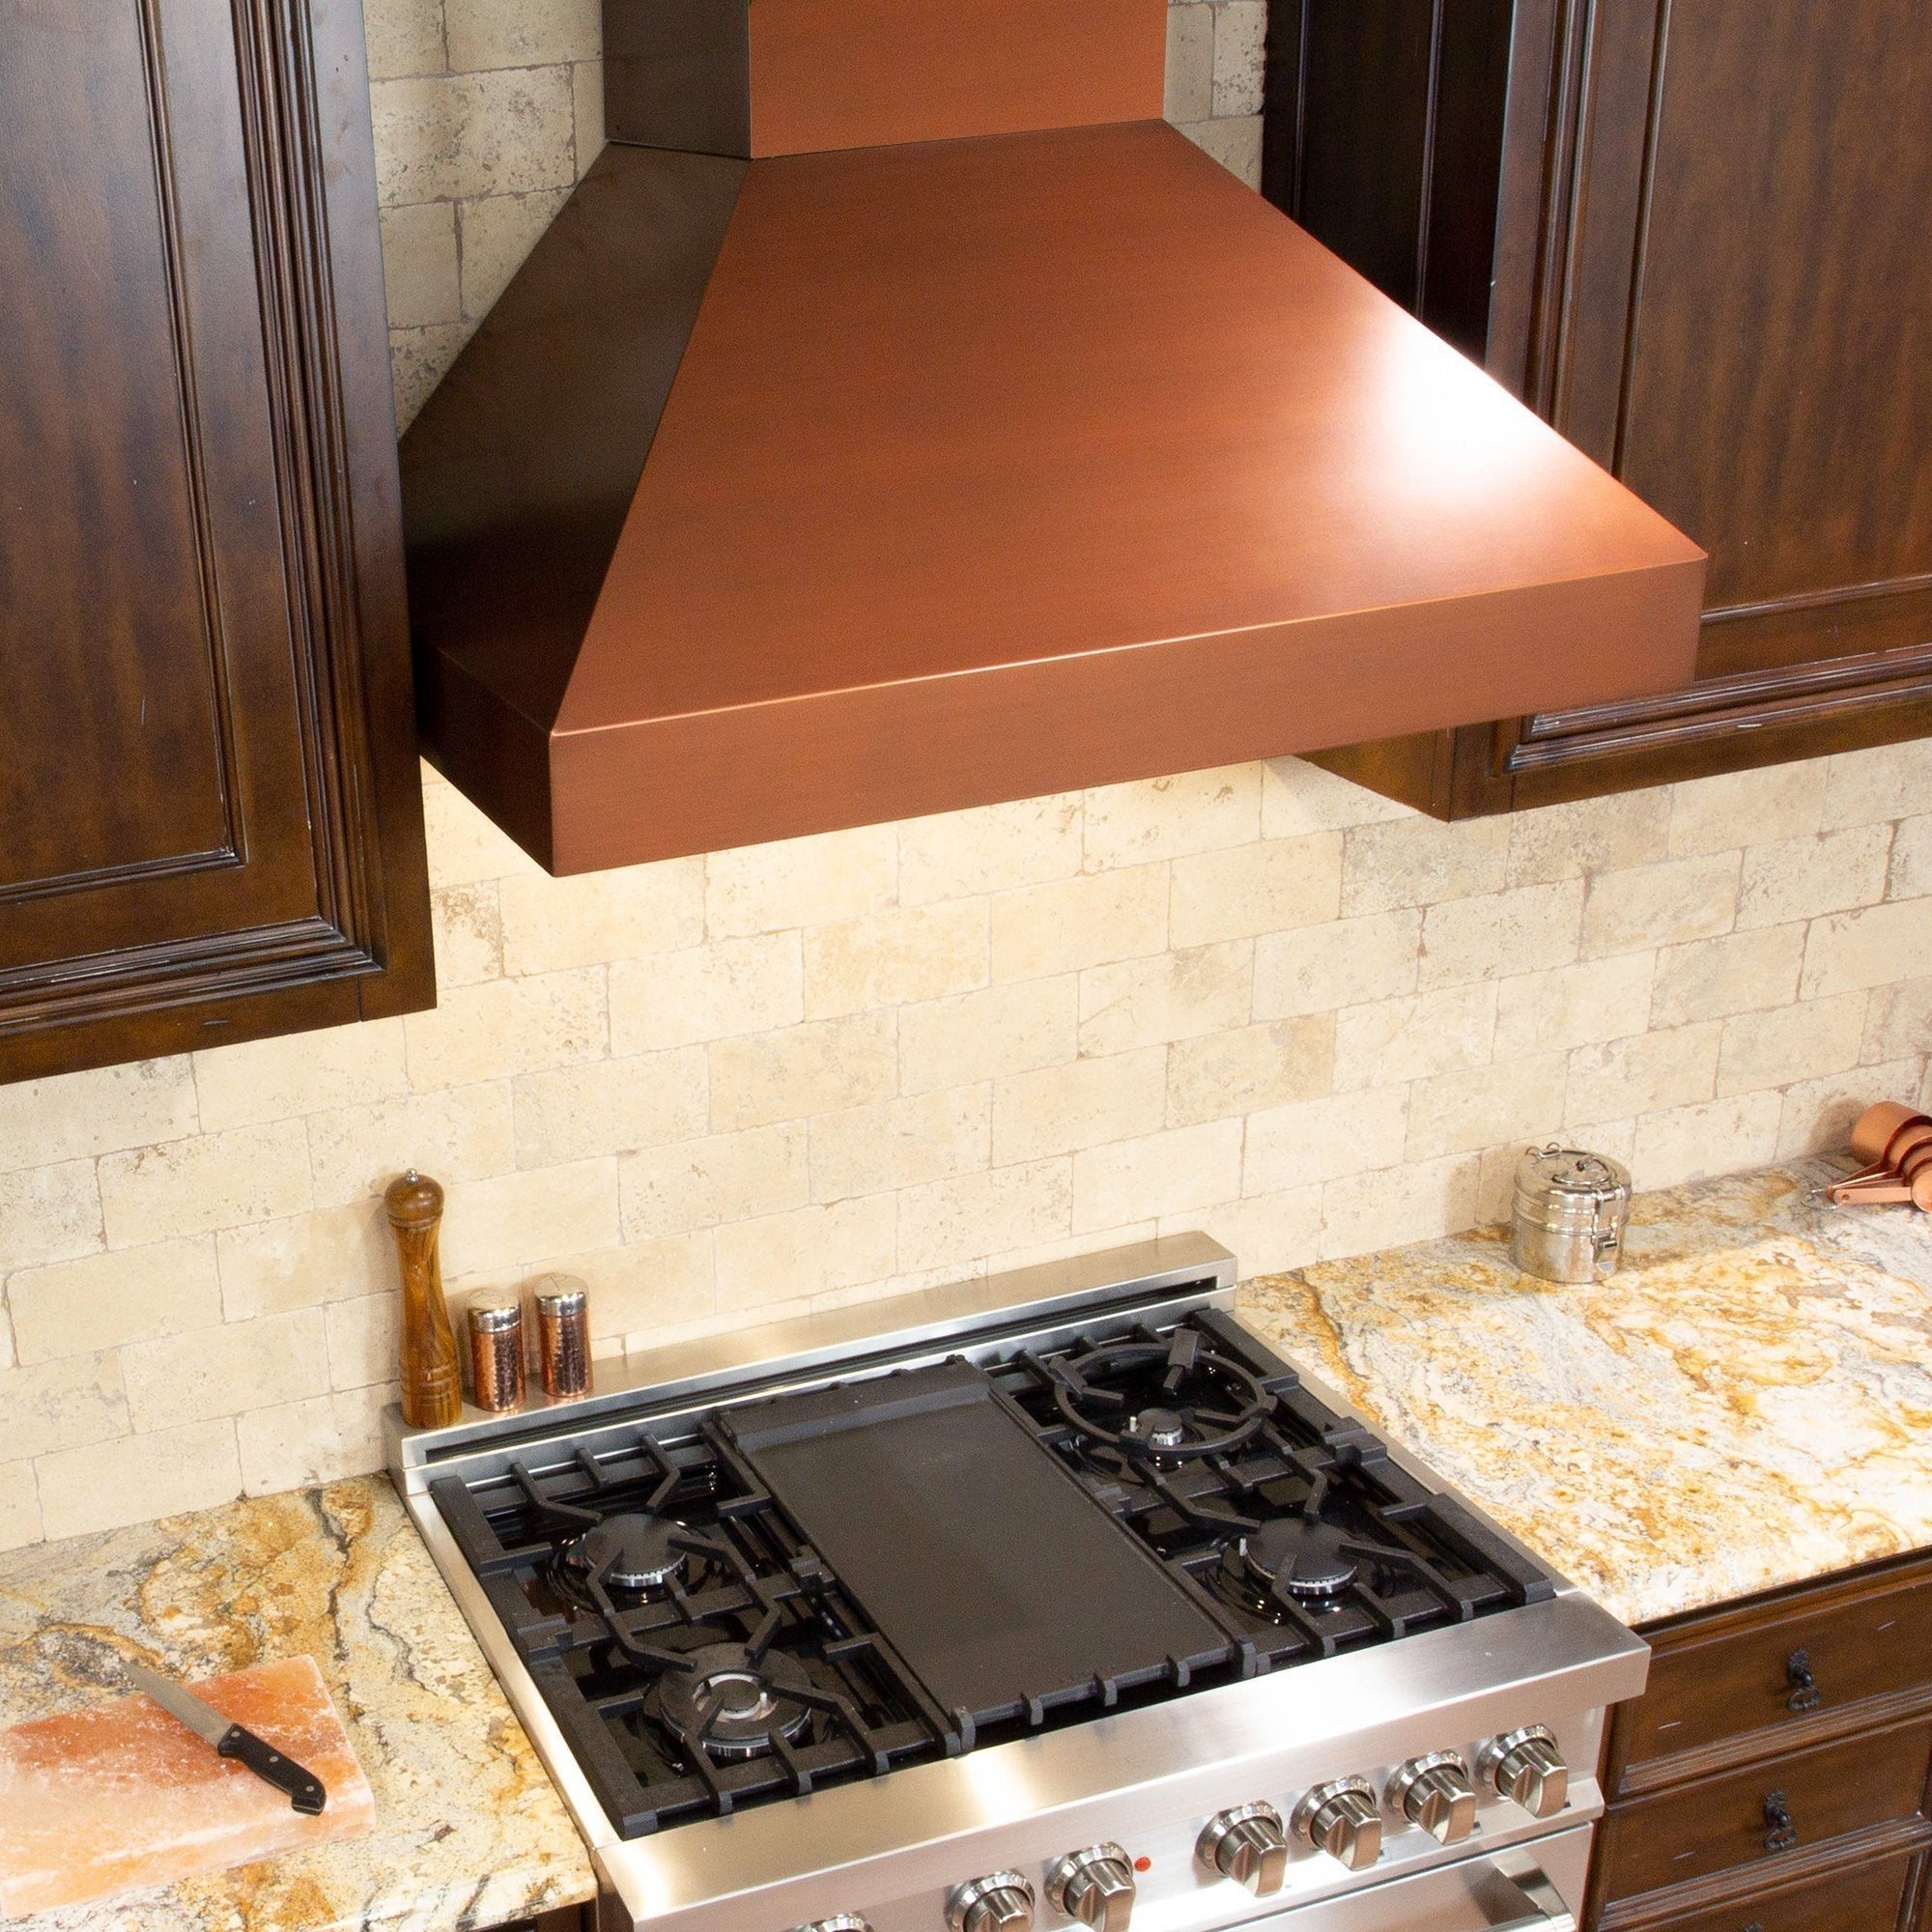 ZLINE Convertible Designer Series Copper Wall Mount Range Hood (8667C) in a rustic-style kitchen with brown cabinets from above with cooktop lighting on.